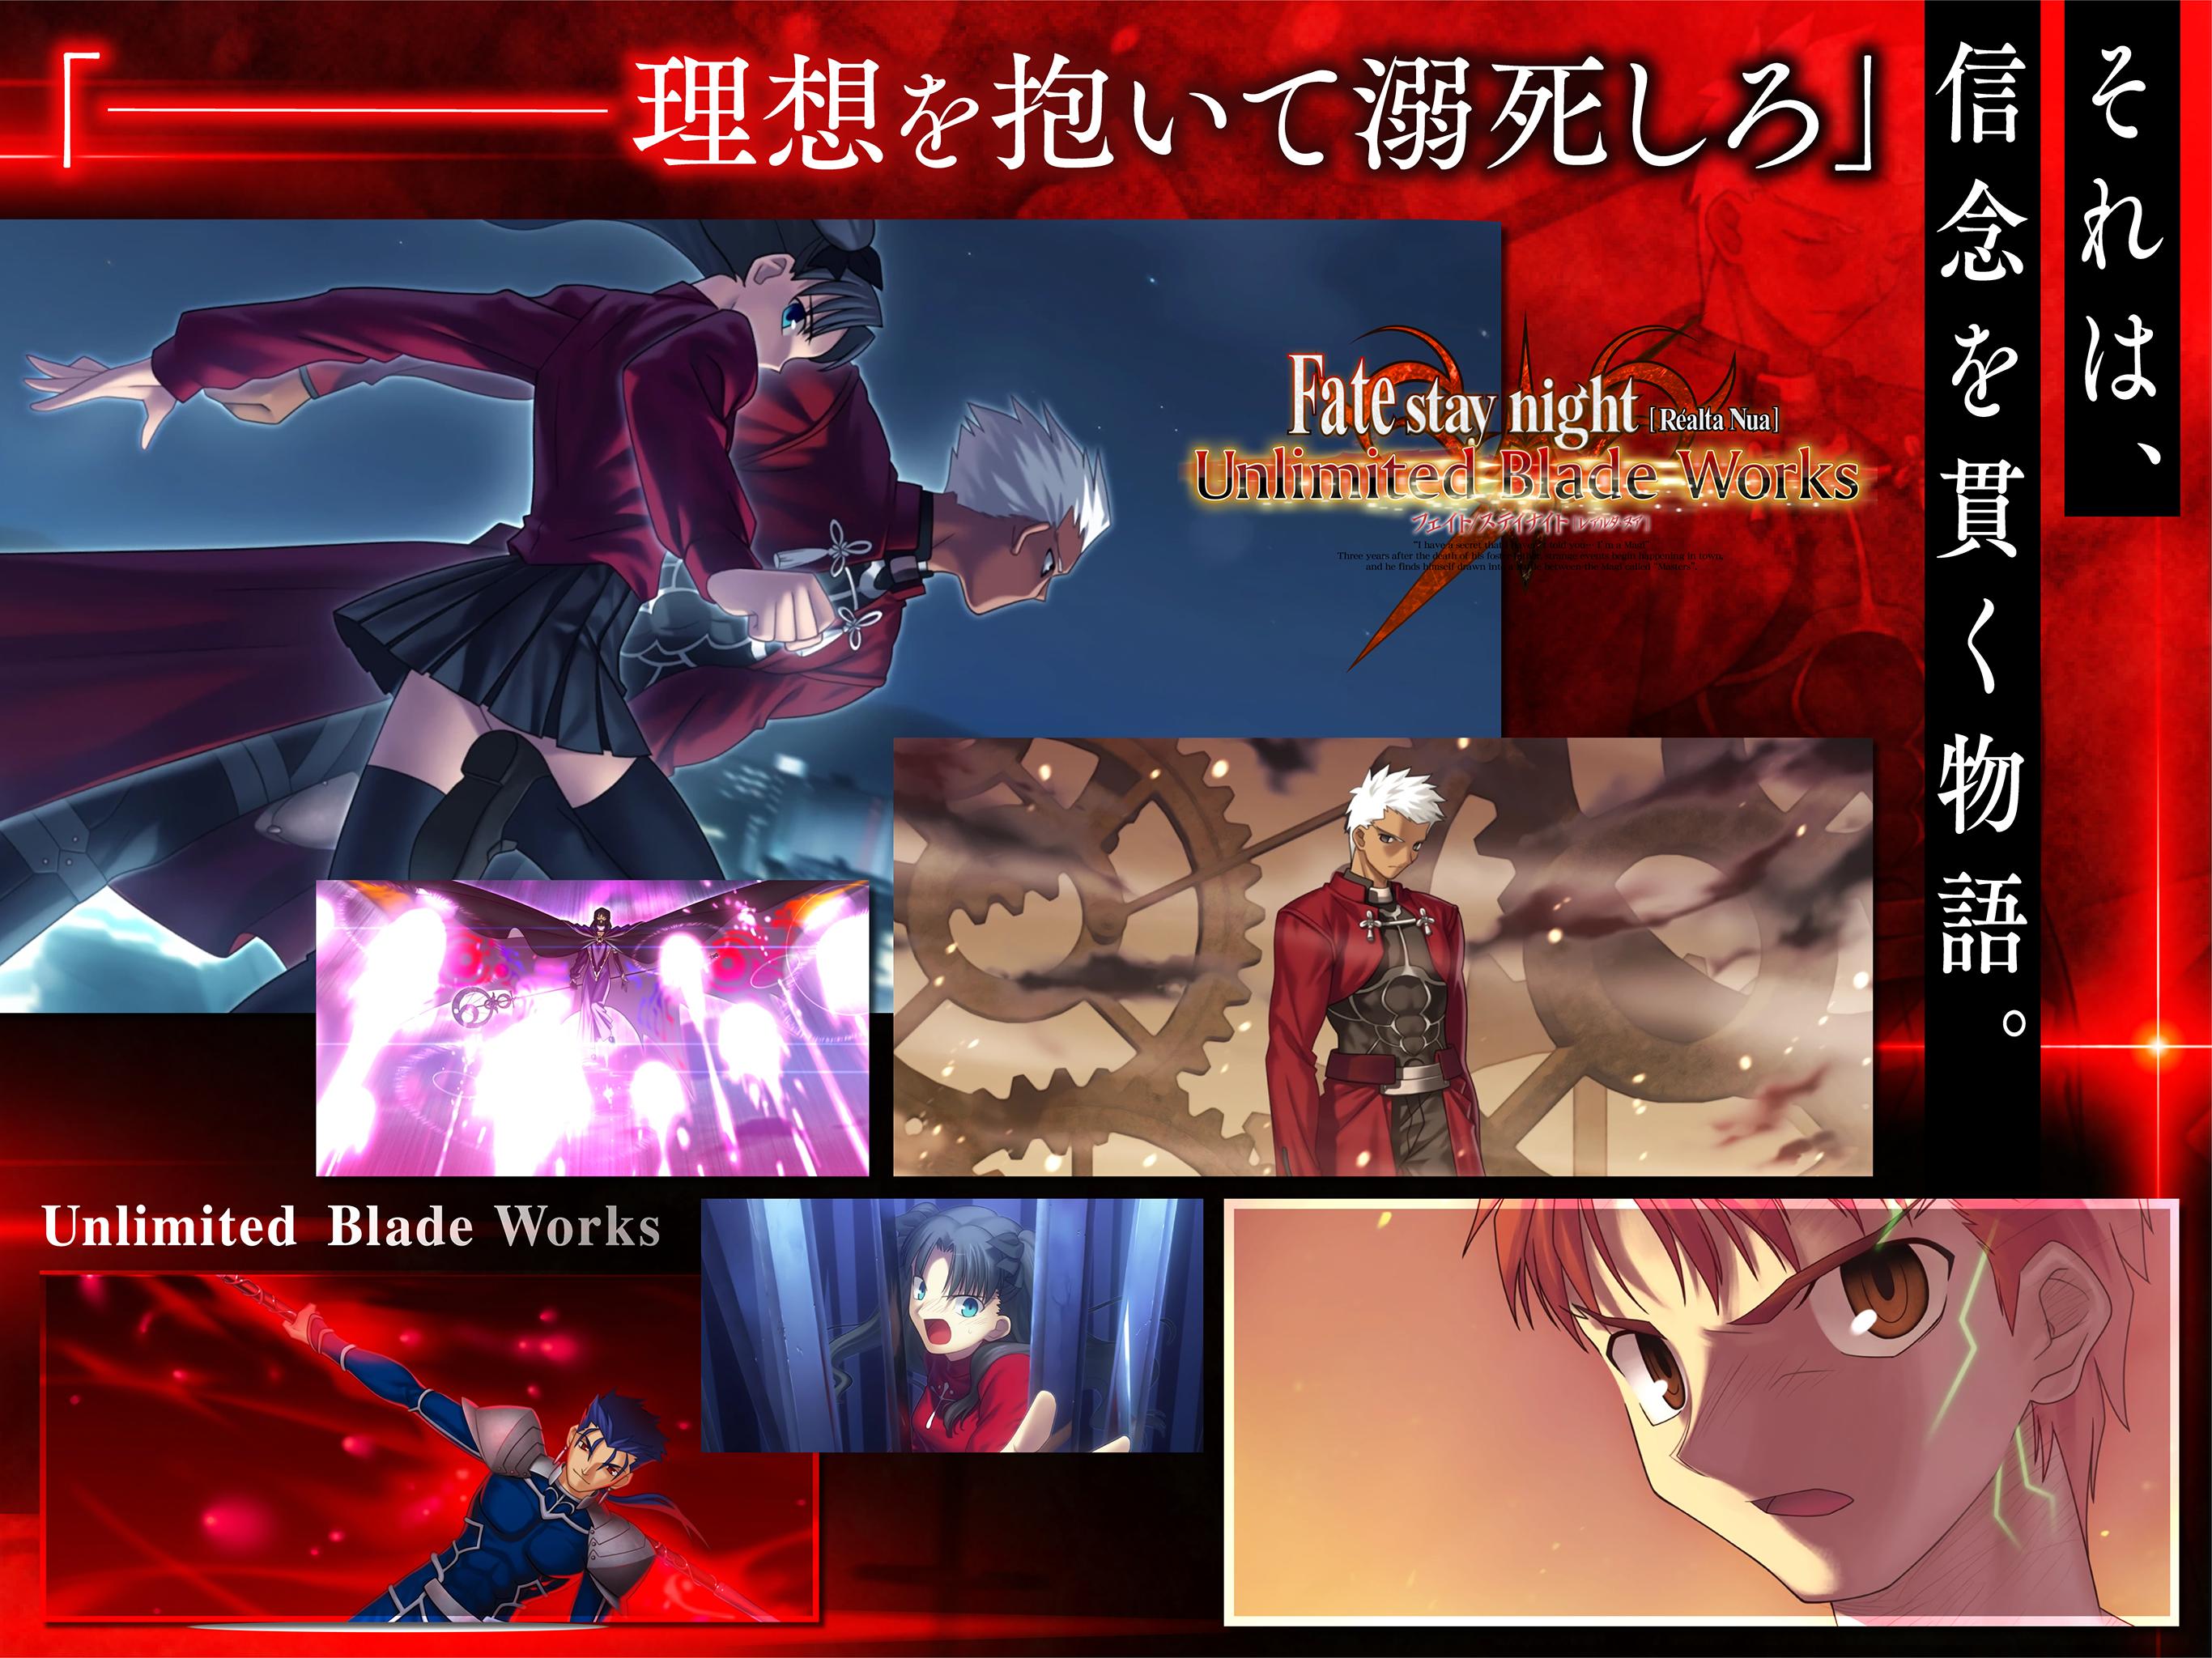 Fate Stay Night Realta Nua For Android Apk Download